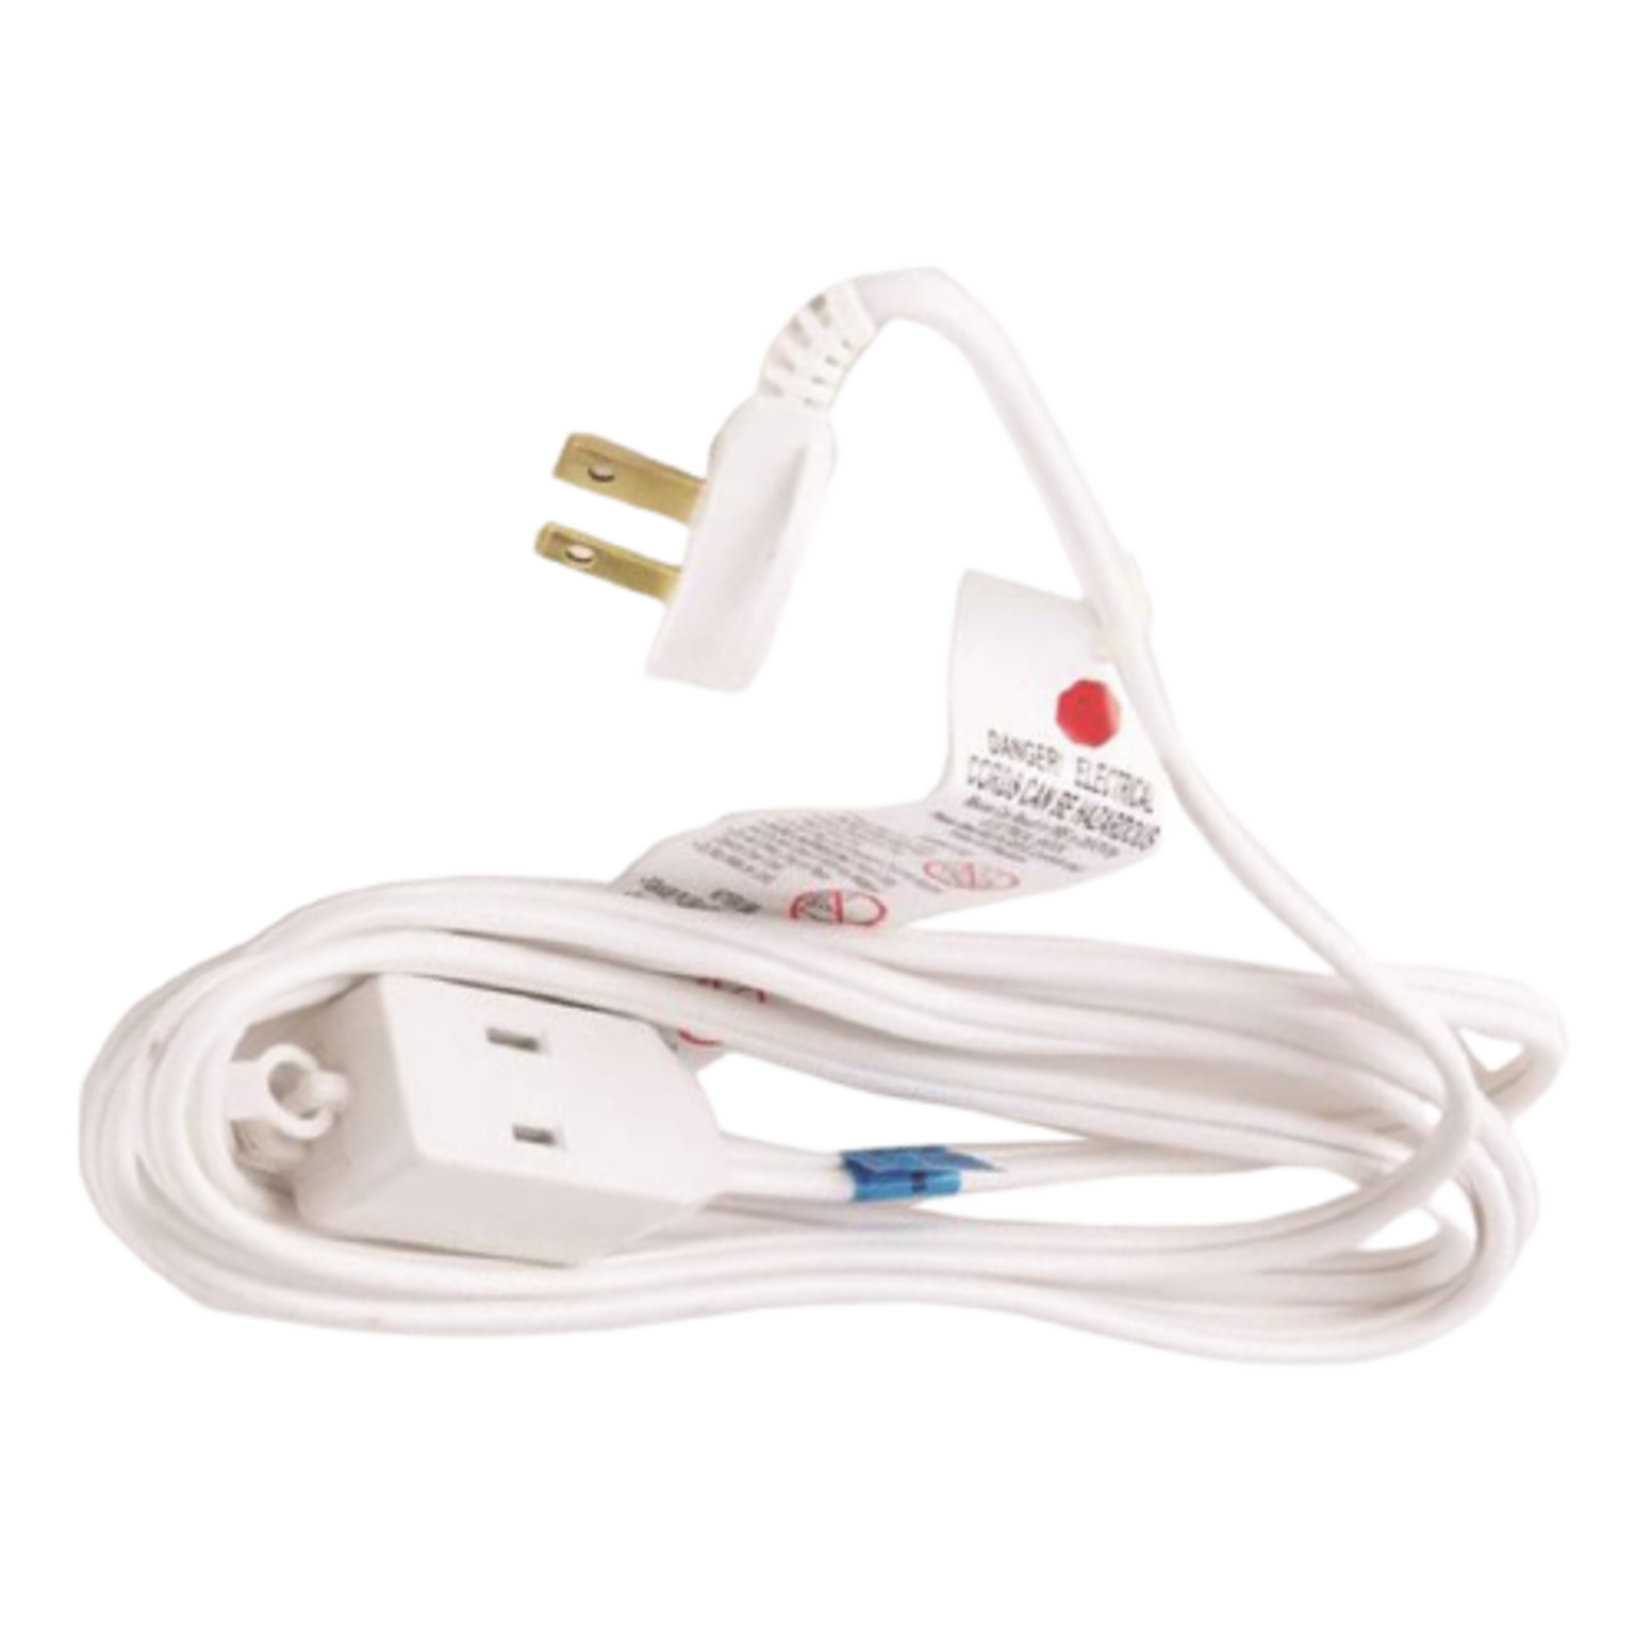 EXT CORD 4M SPT-2 16/2 3-OUTLET INDOOR ATP 104M WHITE